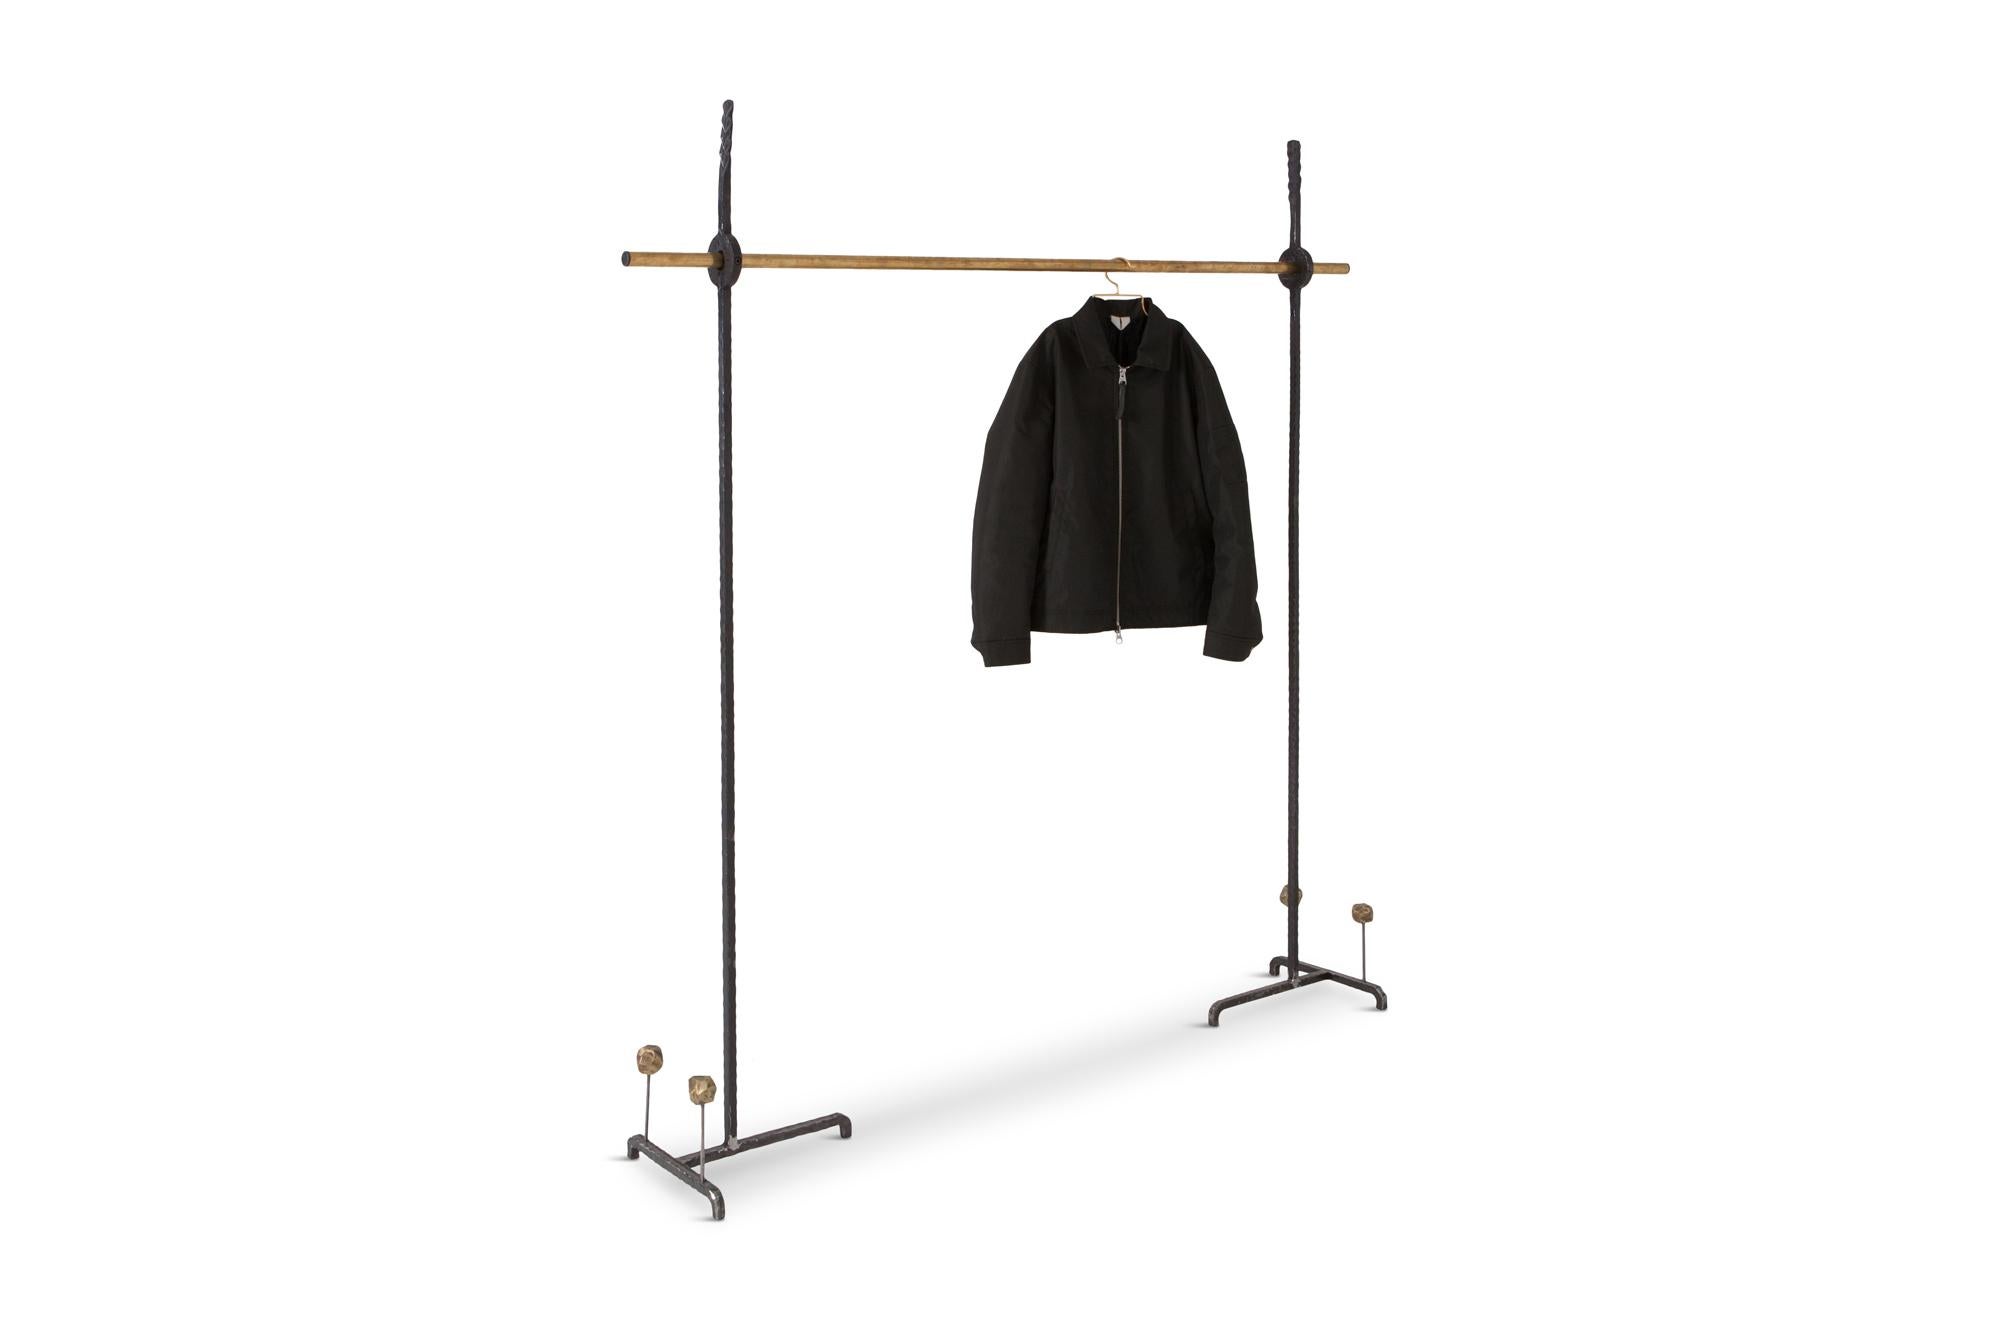 Brutalist Hollywood Regency Bespoke Clothing Rack in Wrought Iron and Brass